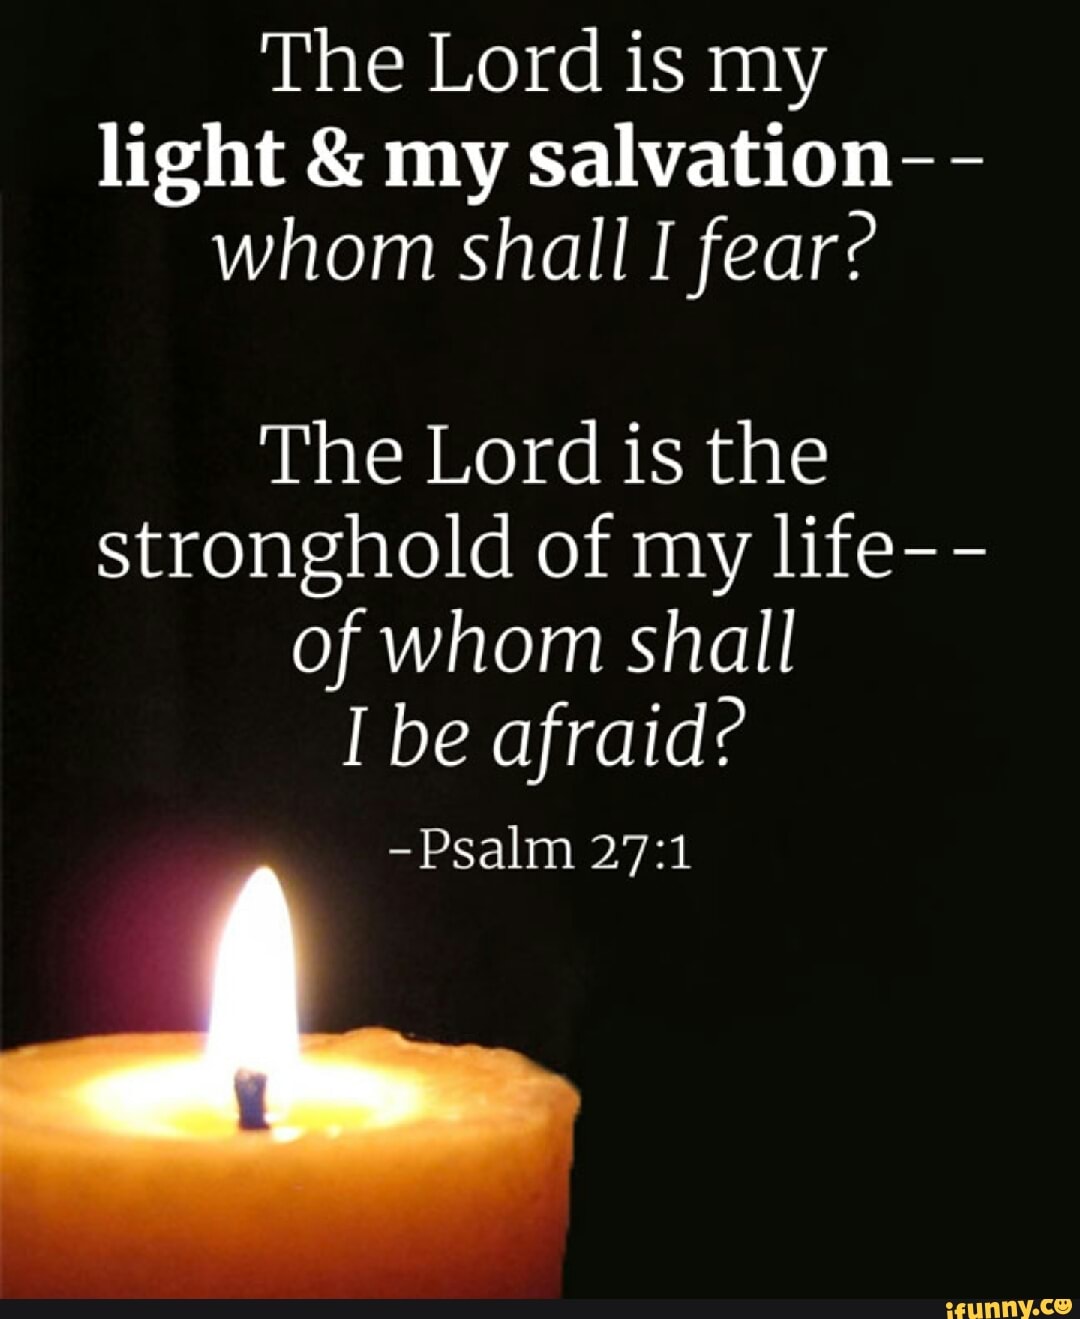 The Lord Is My Light My Salvation Whom Shall I Fear The Lord Is The Stronghold Of My Life